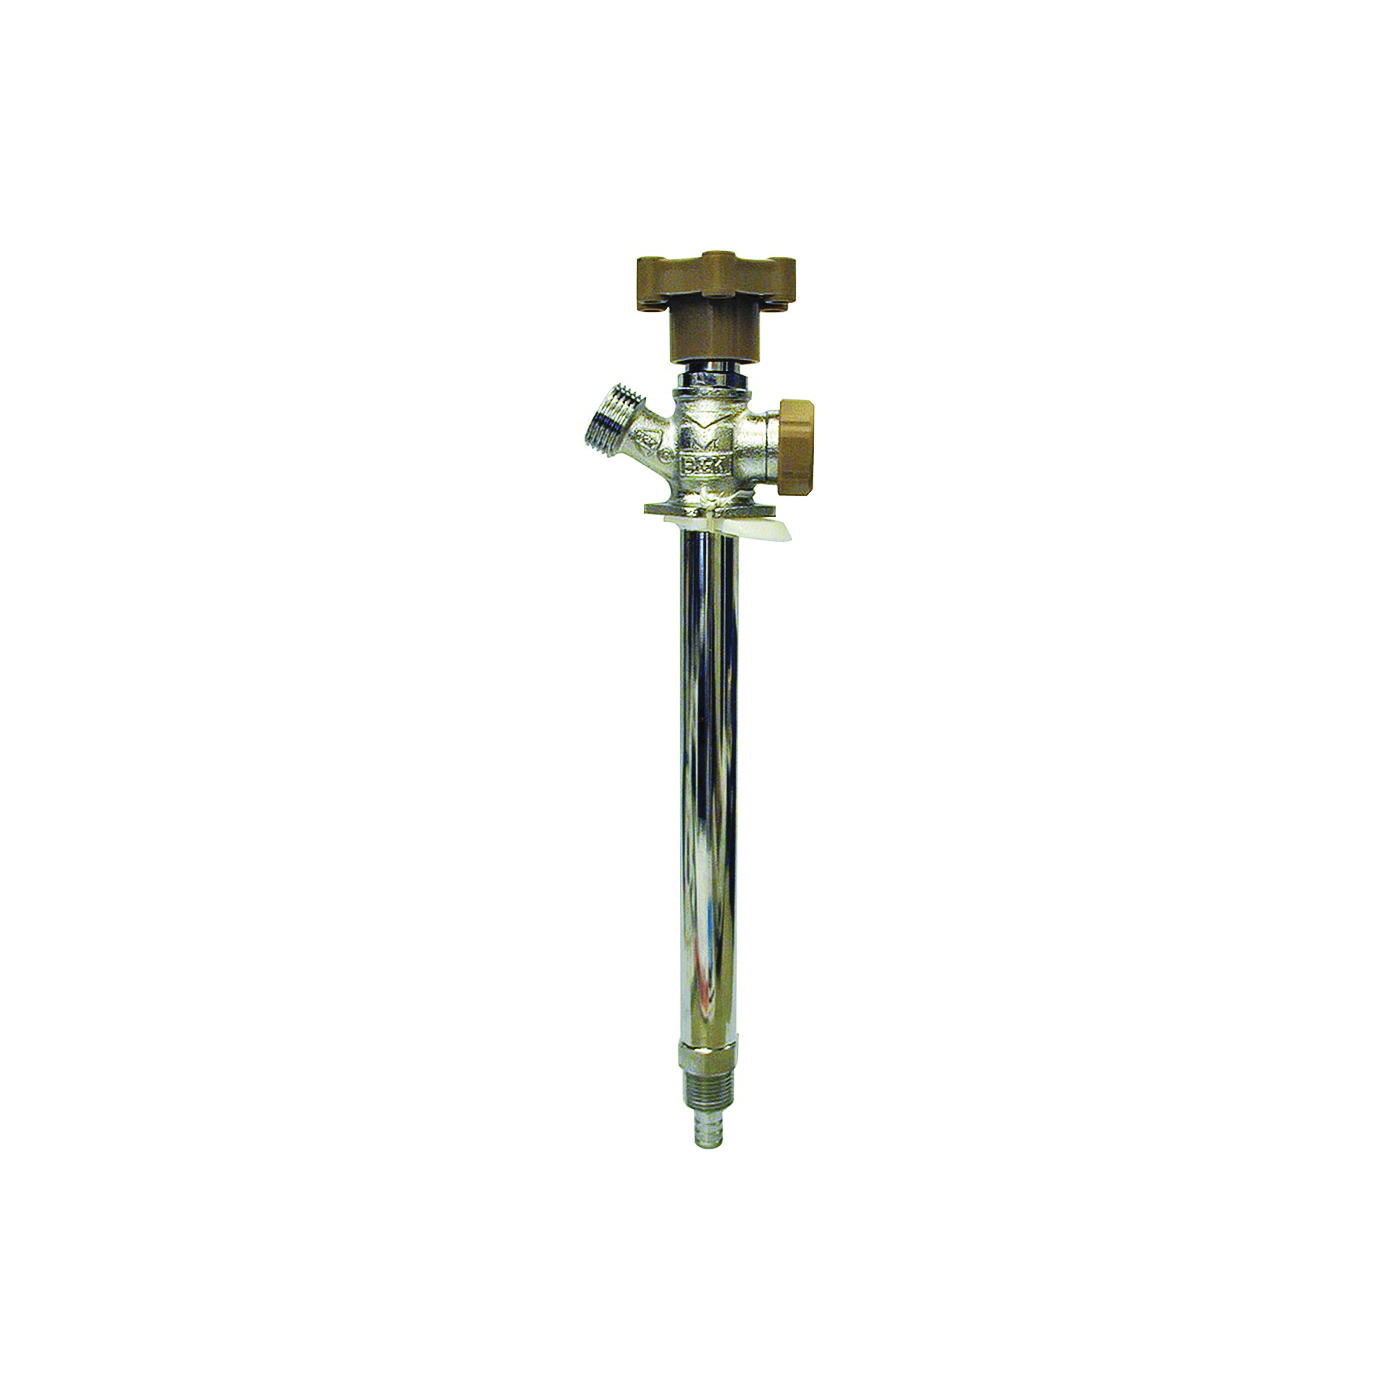 104-849HC Anti-Siphon Frost-Free Sillcock Valve, 1/2 x 3/4 in Connection, MPT x Hose, 125 psi Pressure, Brass Body